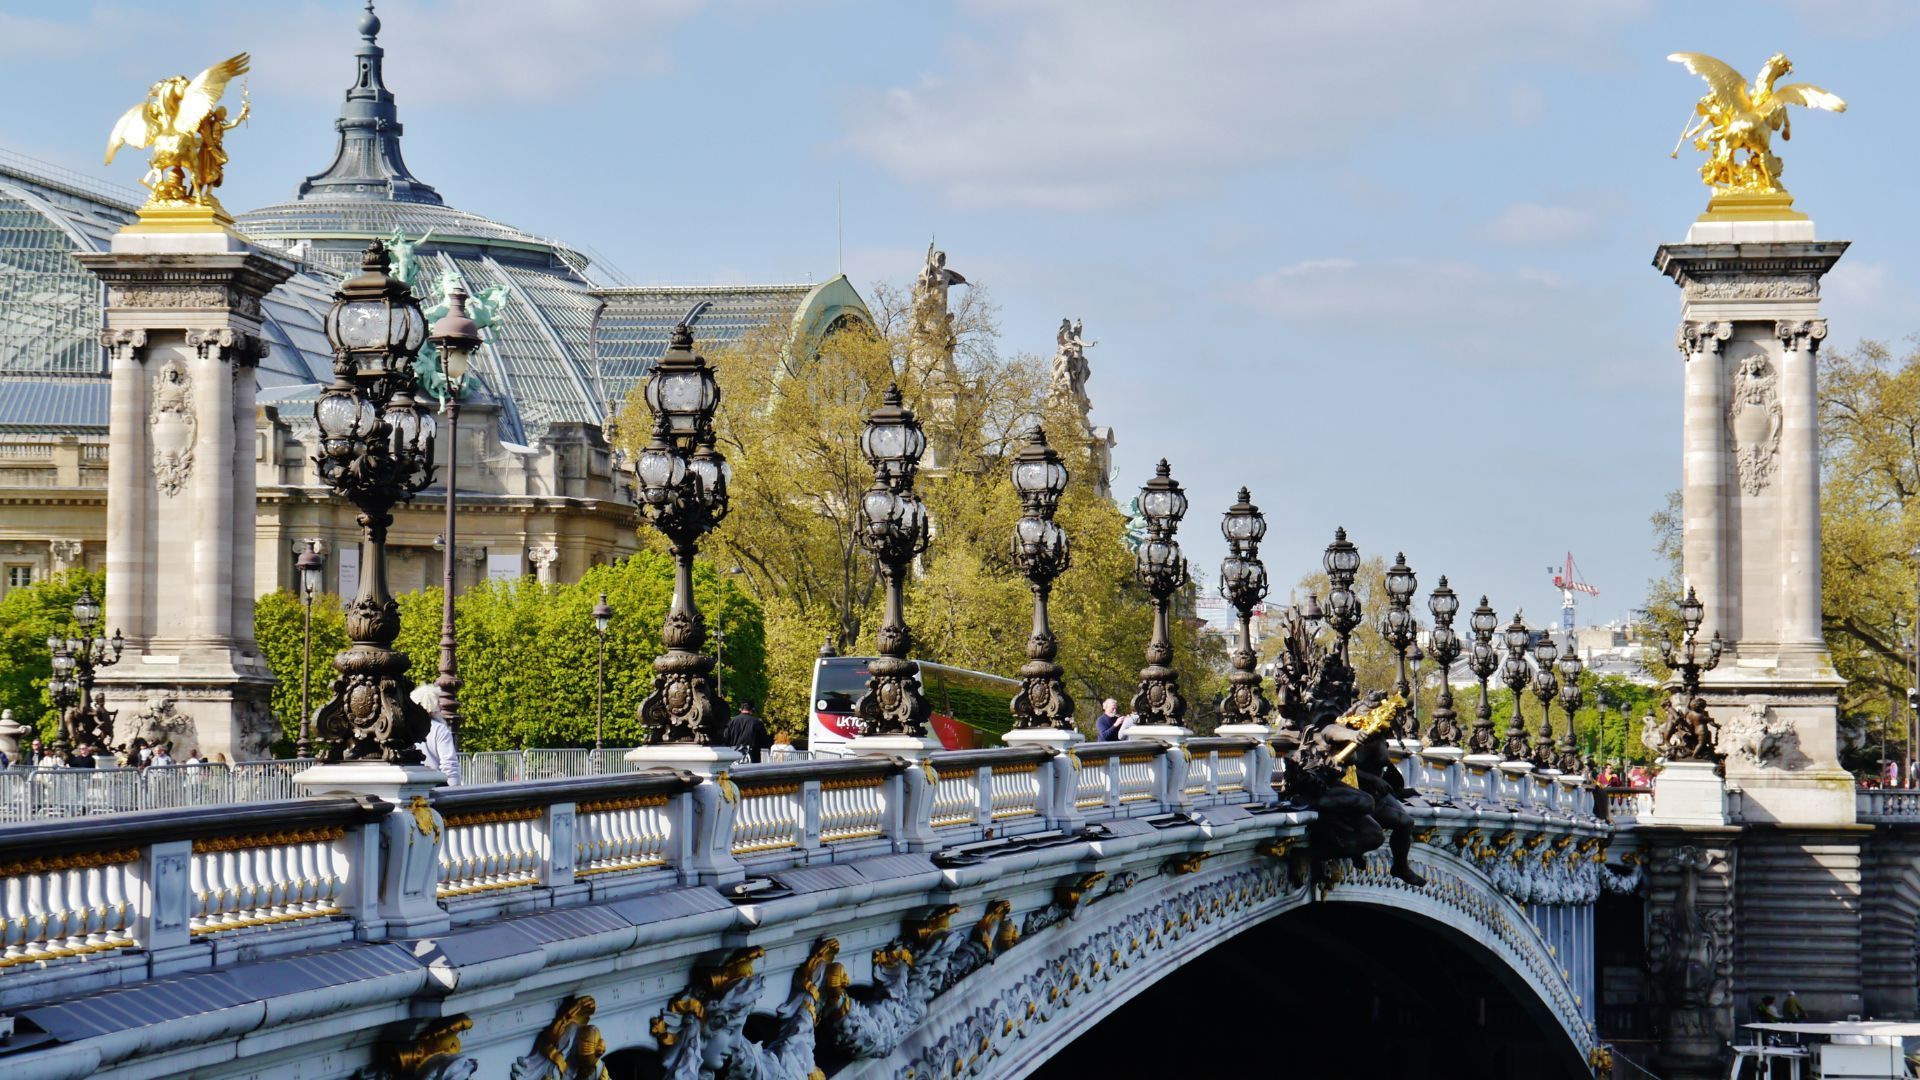 6 Emily In Paris Scenes Locations For You To Visit In Real Life - Hipshut -  Discover Asia's Best Boutique Hotels